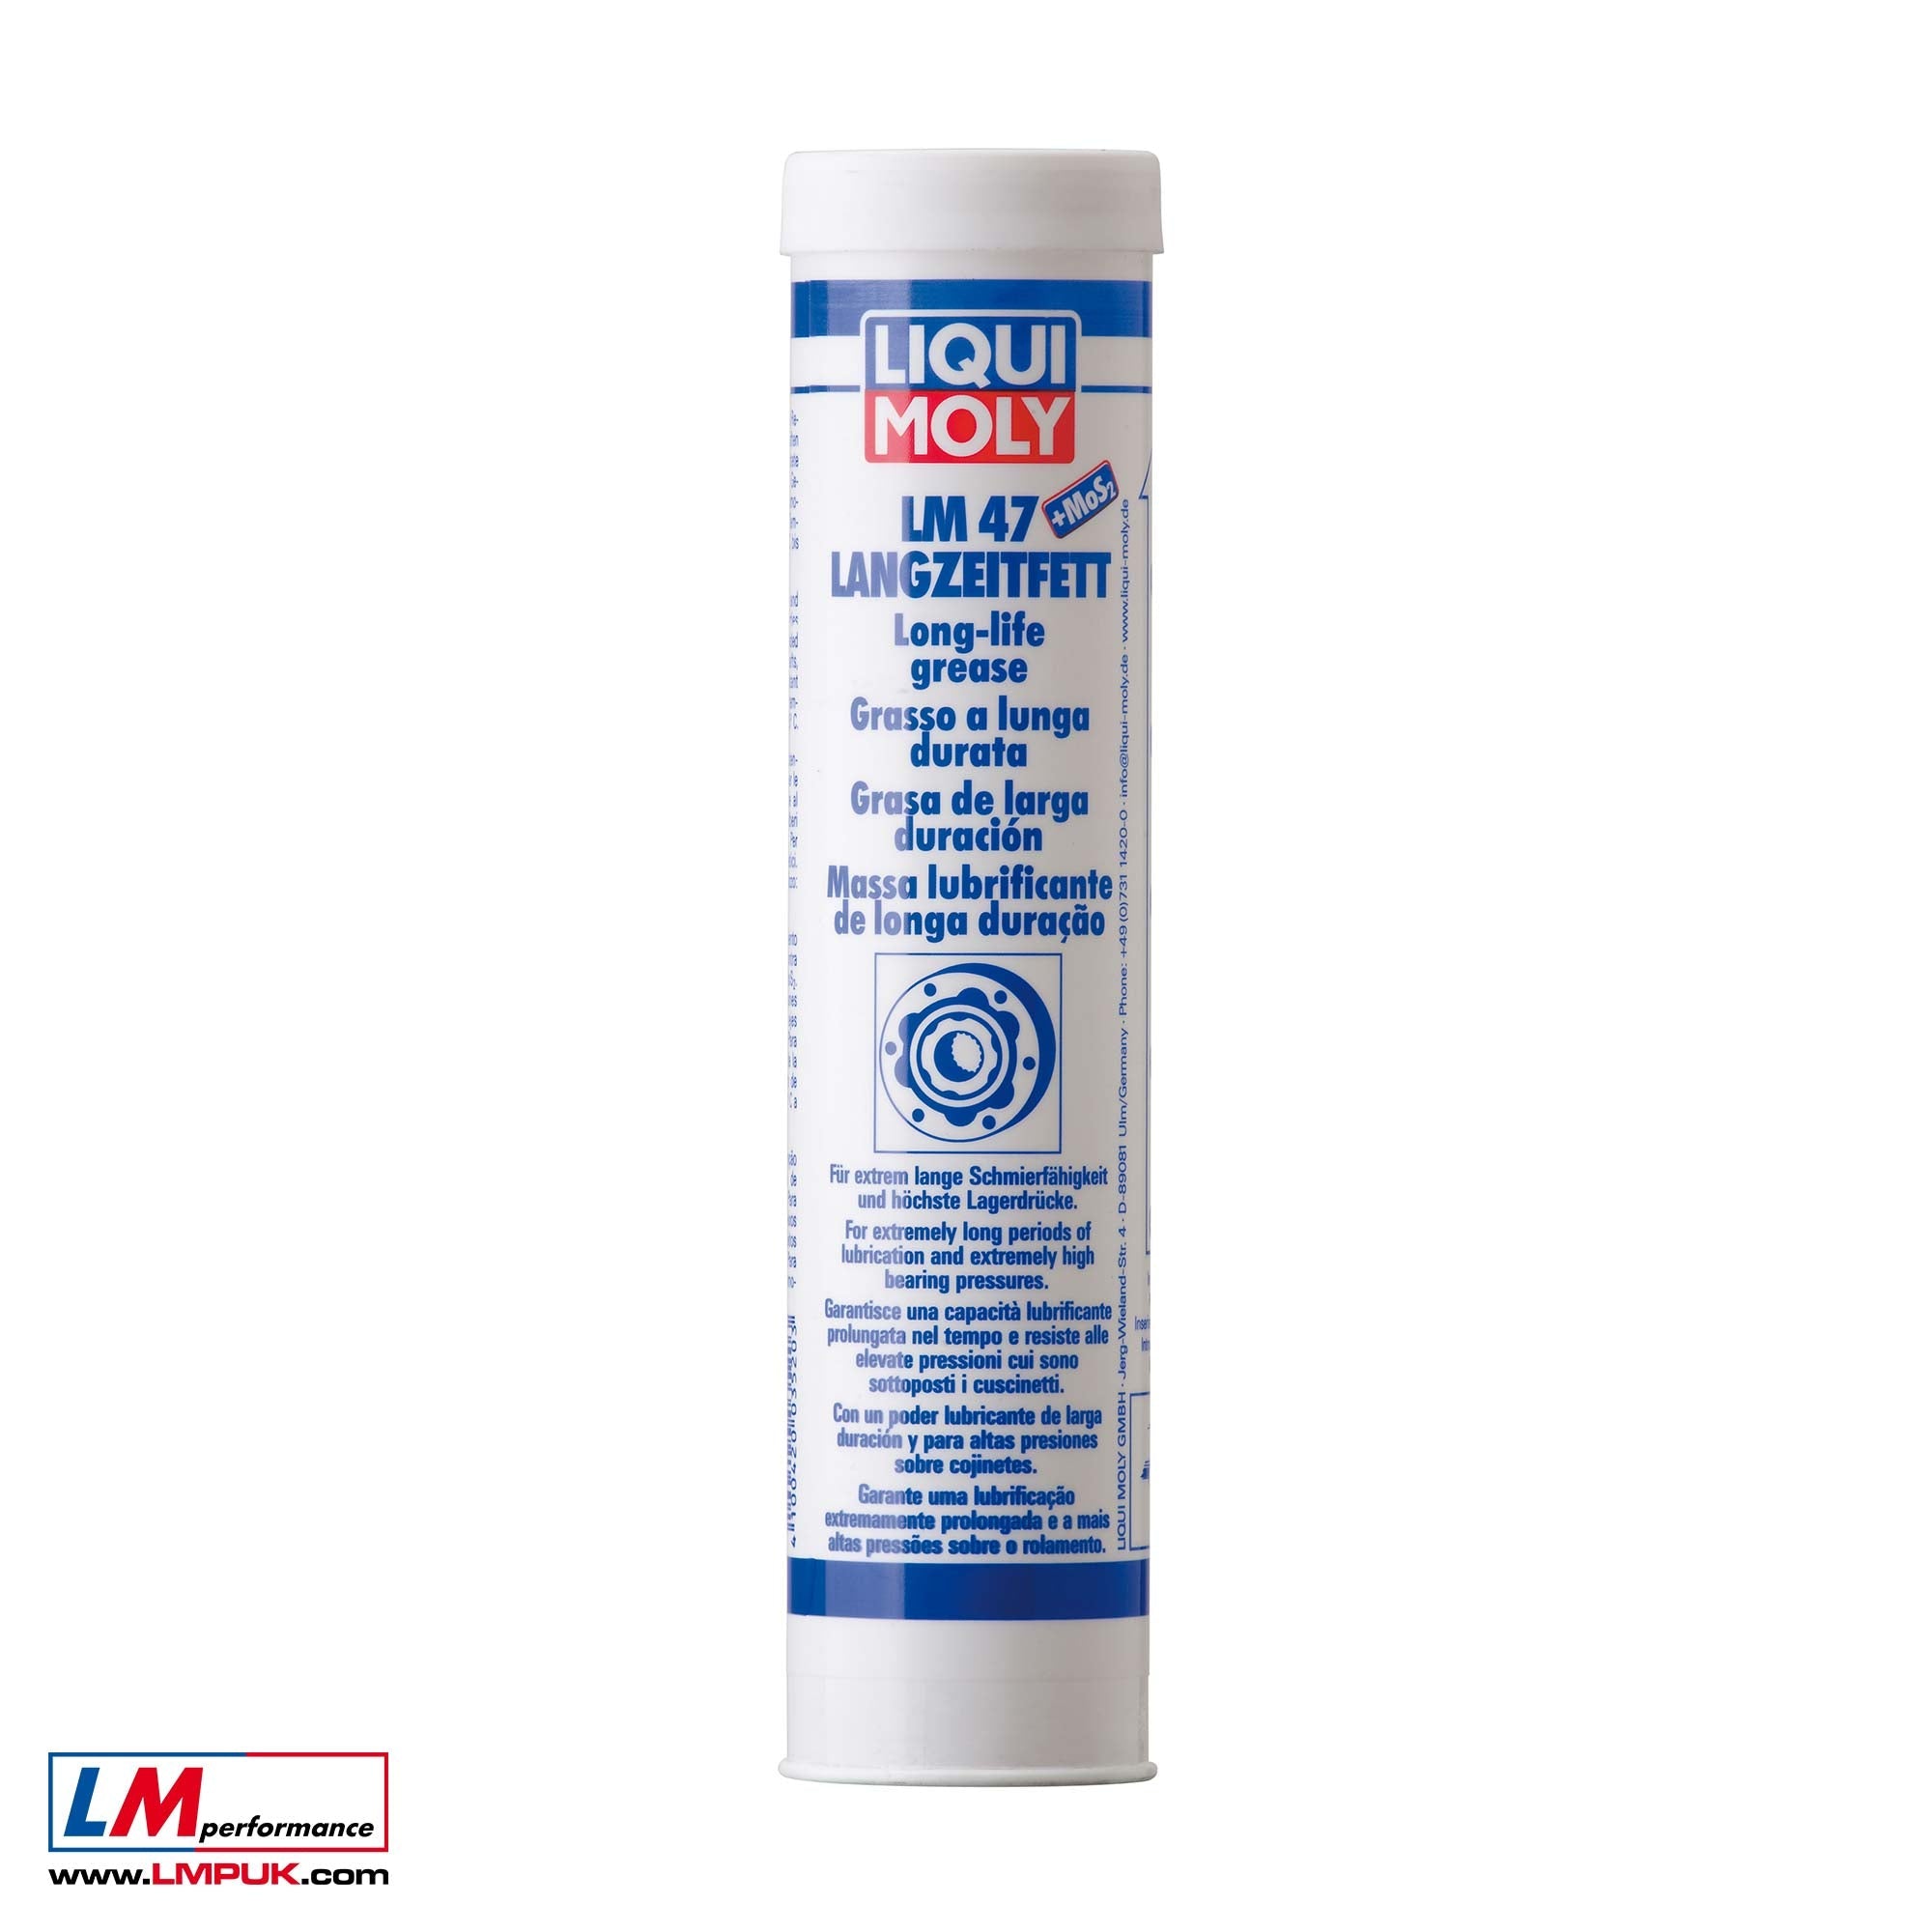 4 Facts you probably don't know about LIQUI MOLY MoS2. – Liqui Moly Malaysia